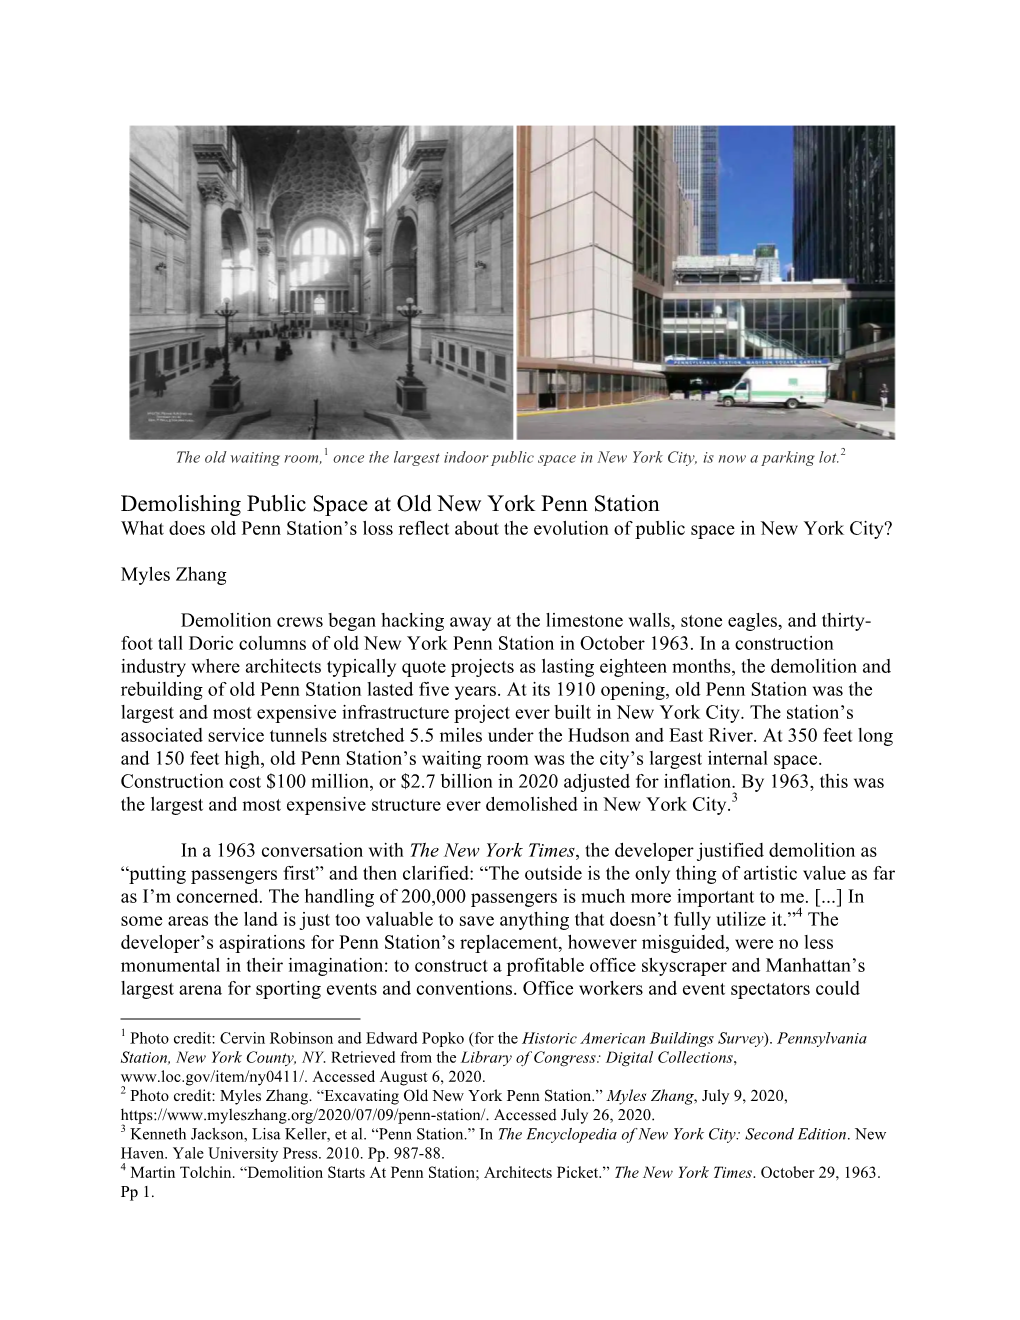 Demolishing Public Space at Old New York Penn Station What Does Old Penn Station’S Loss Reflect About the Evolution of Public Space in New York City?